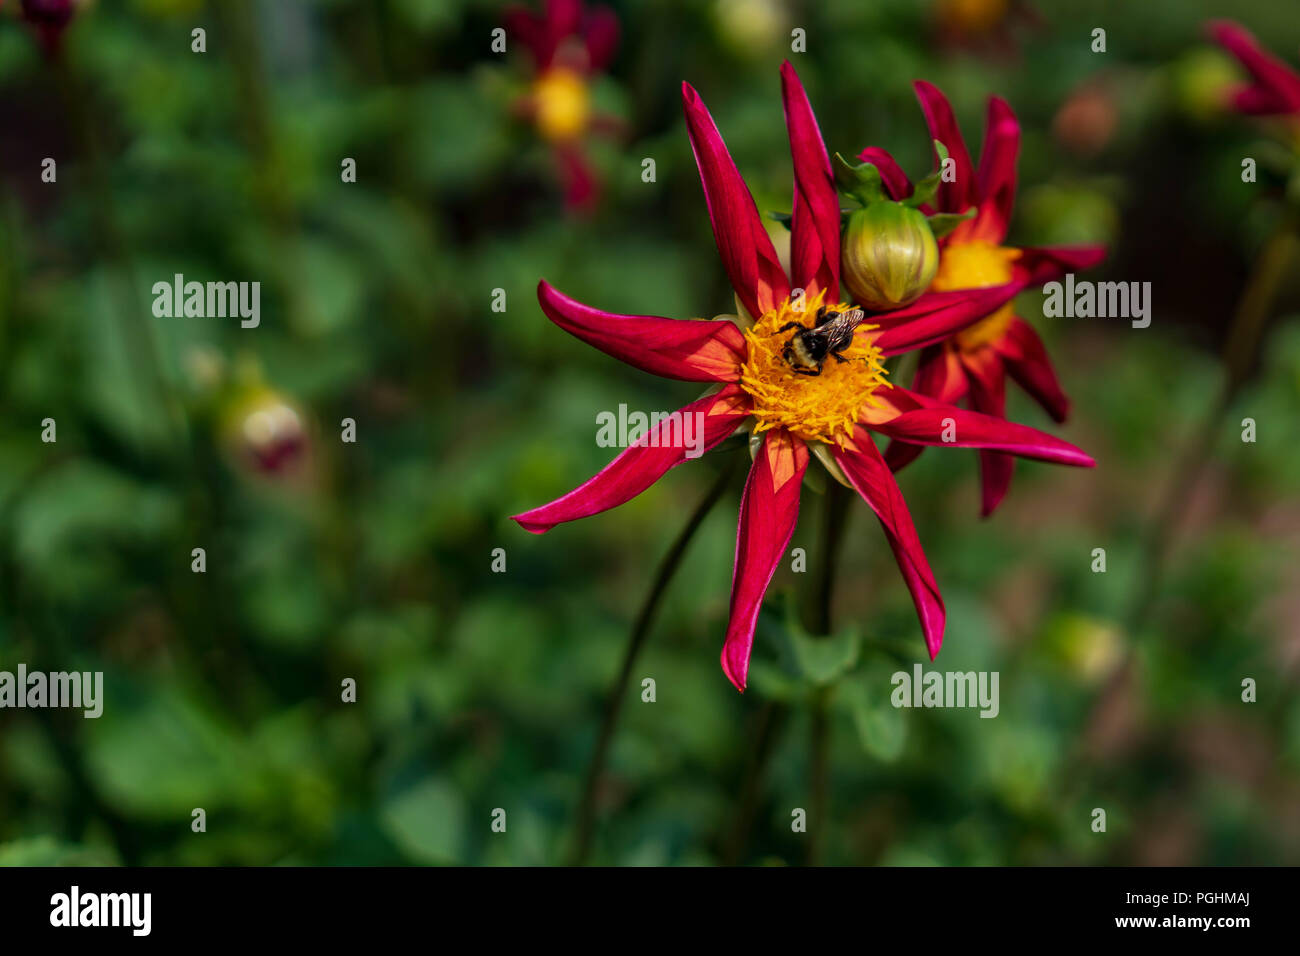 Dahlias on Display with Pollinators at work, Canby Oregon Stock Photo